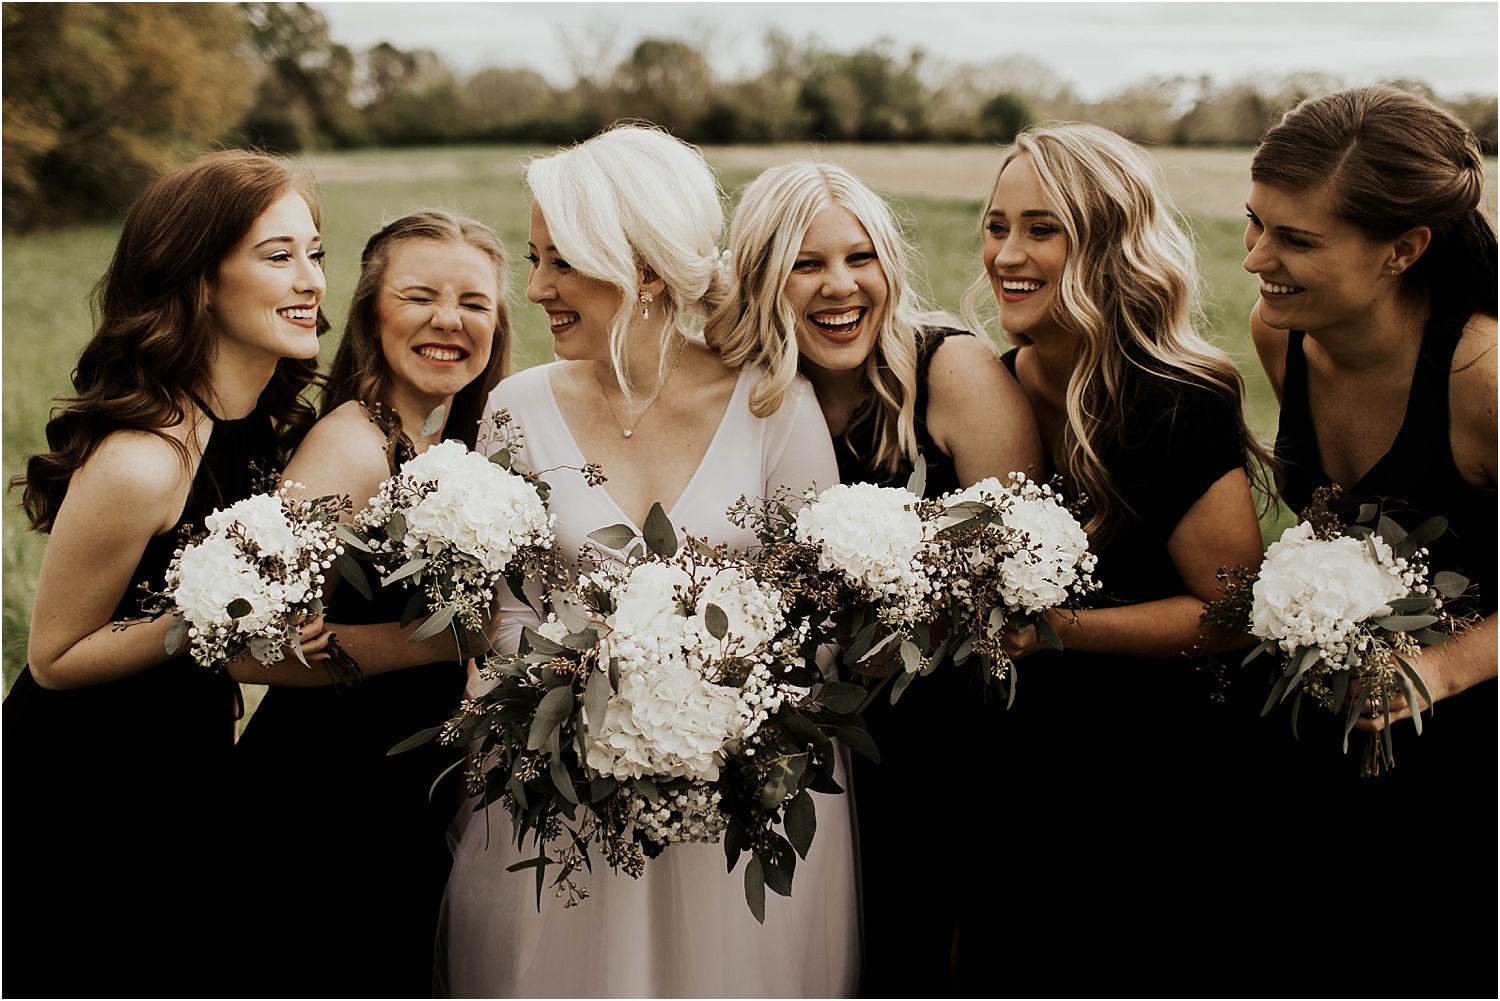 20 Ways to Save Money on Your Wedding – The Internet's Maid of Honor